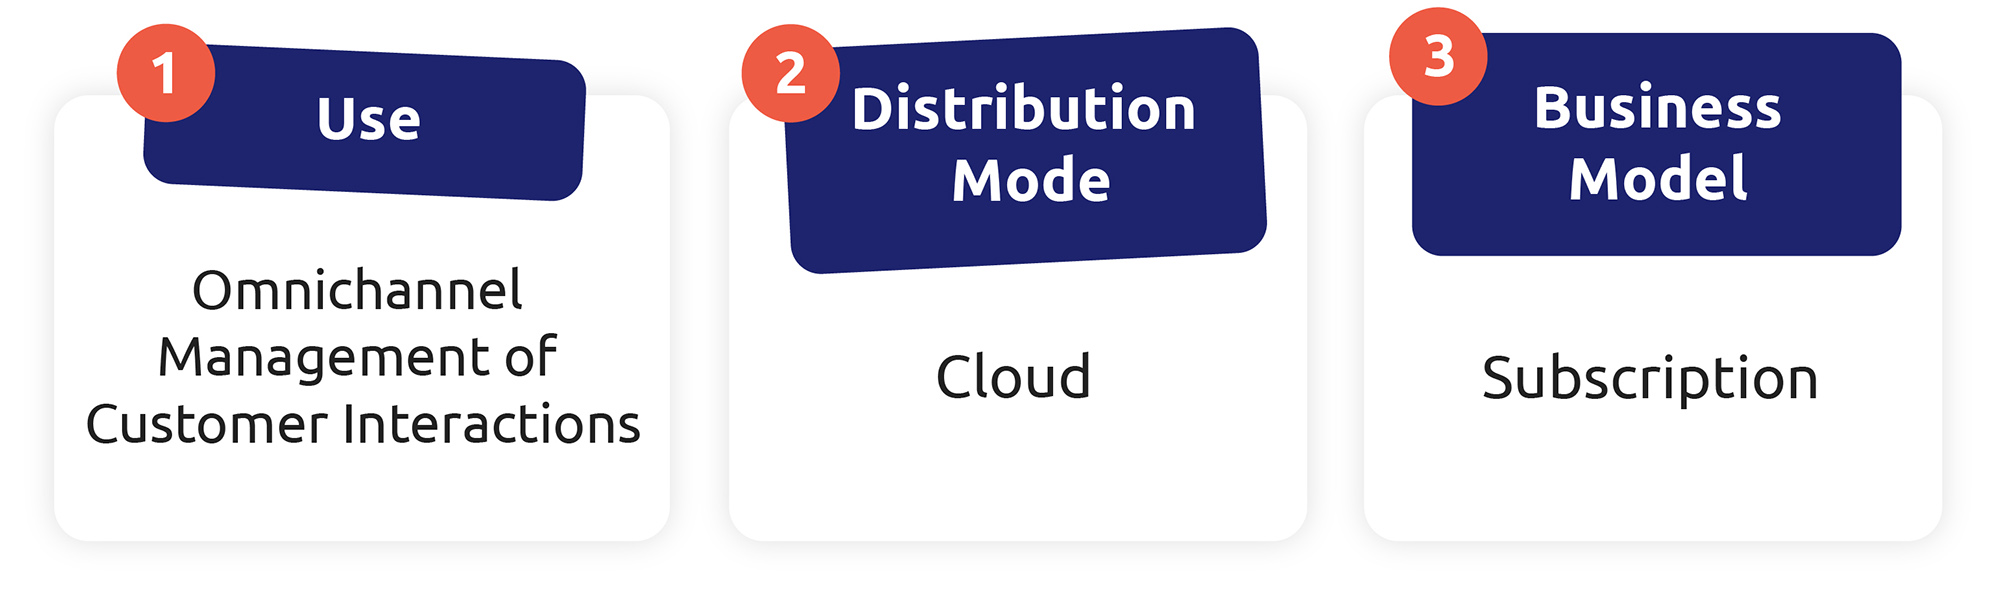 The three characteristics of a CCaaS are: omnichannel management, cloud-based distribution and a subscription-based system.